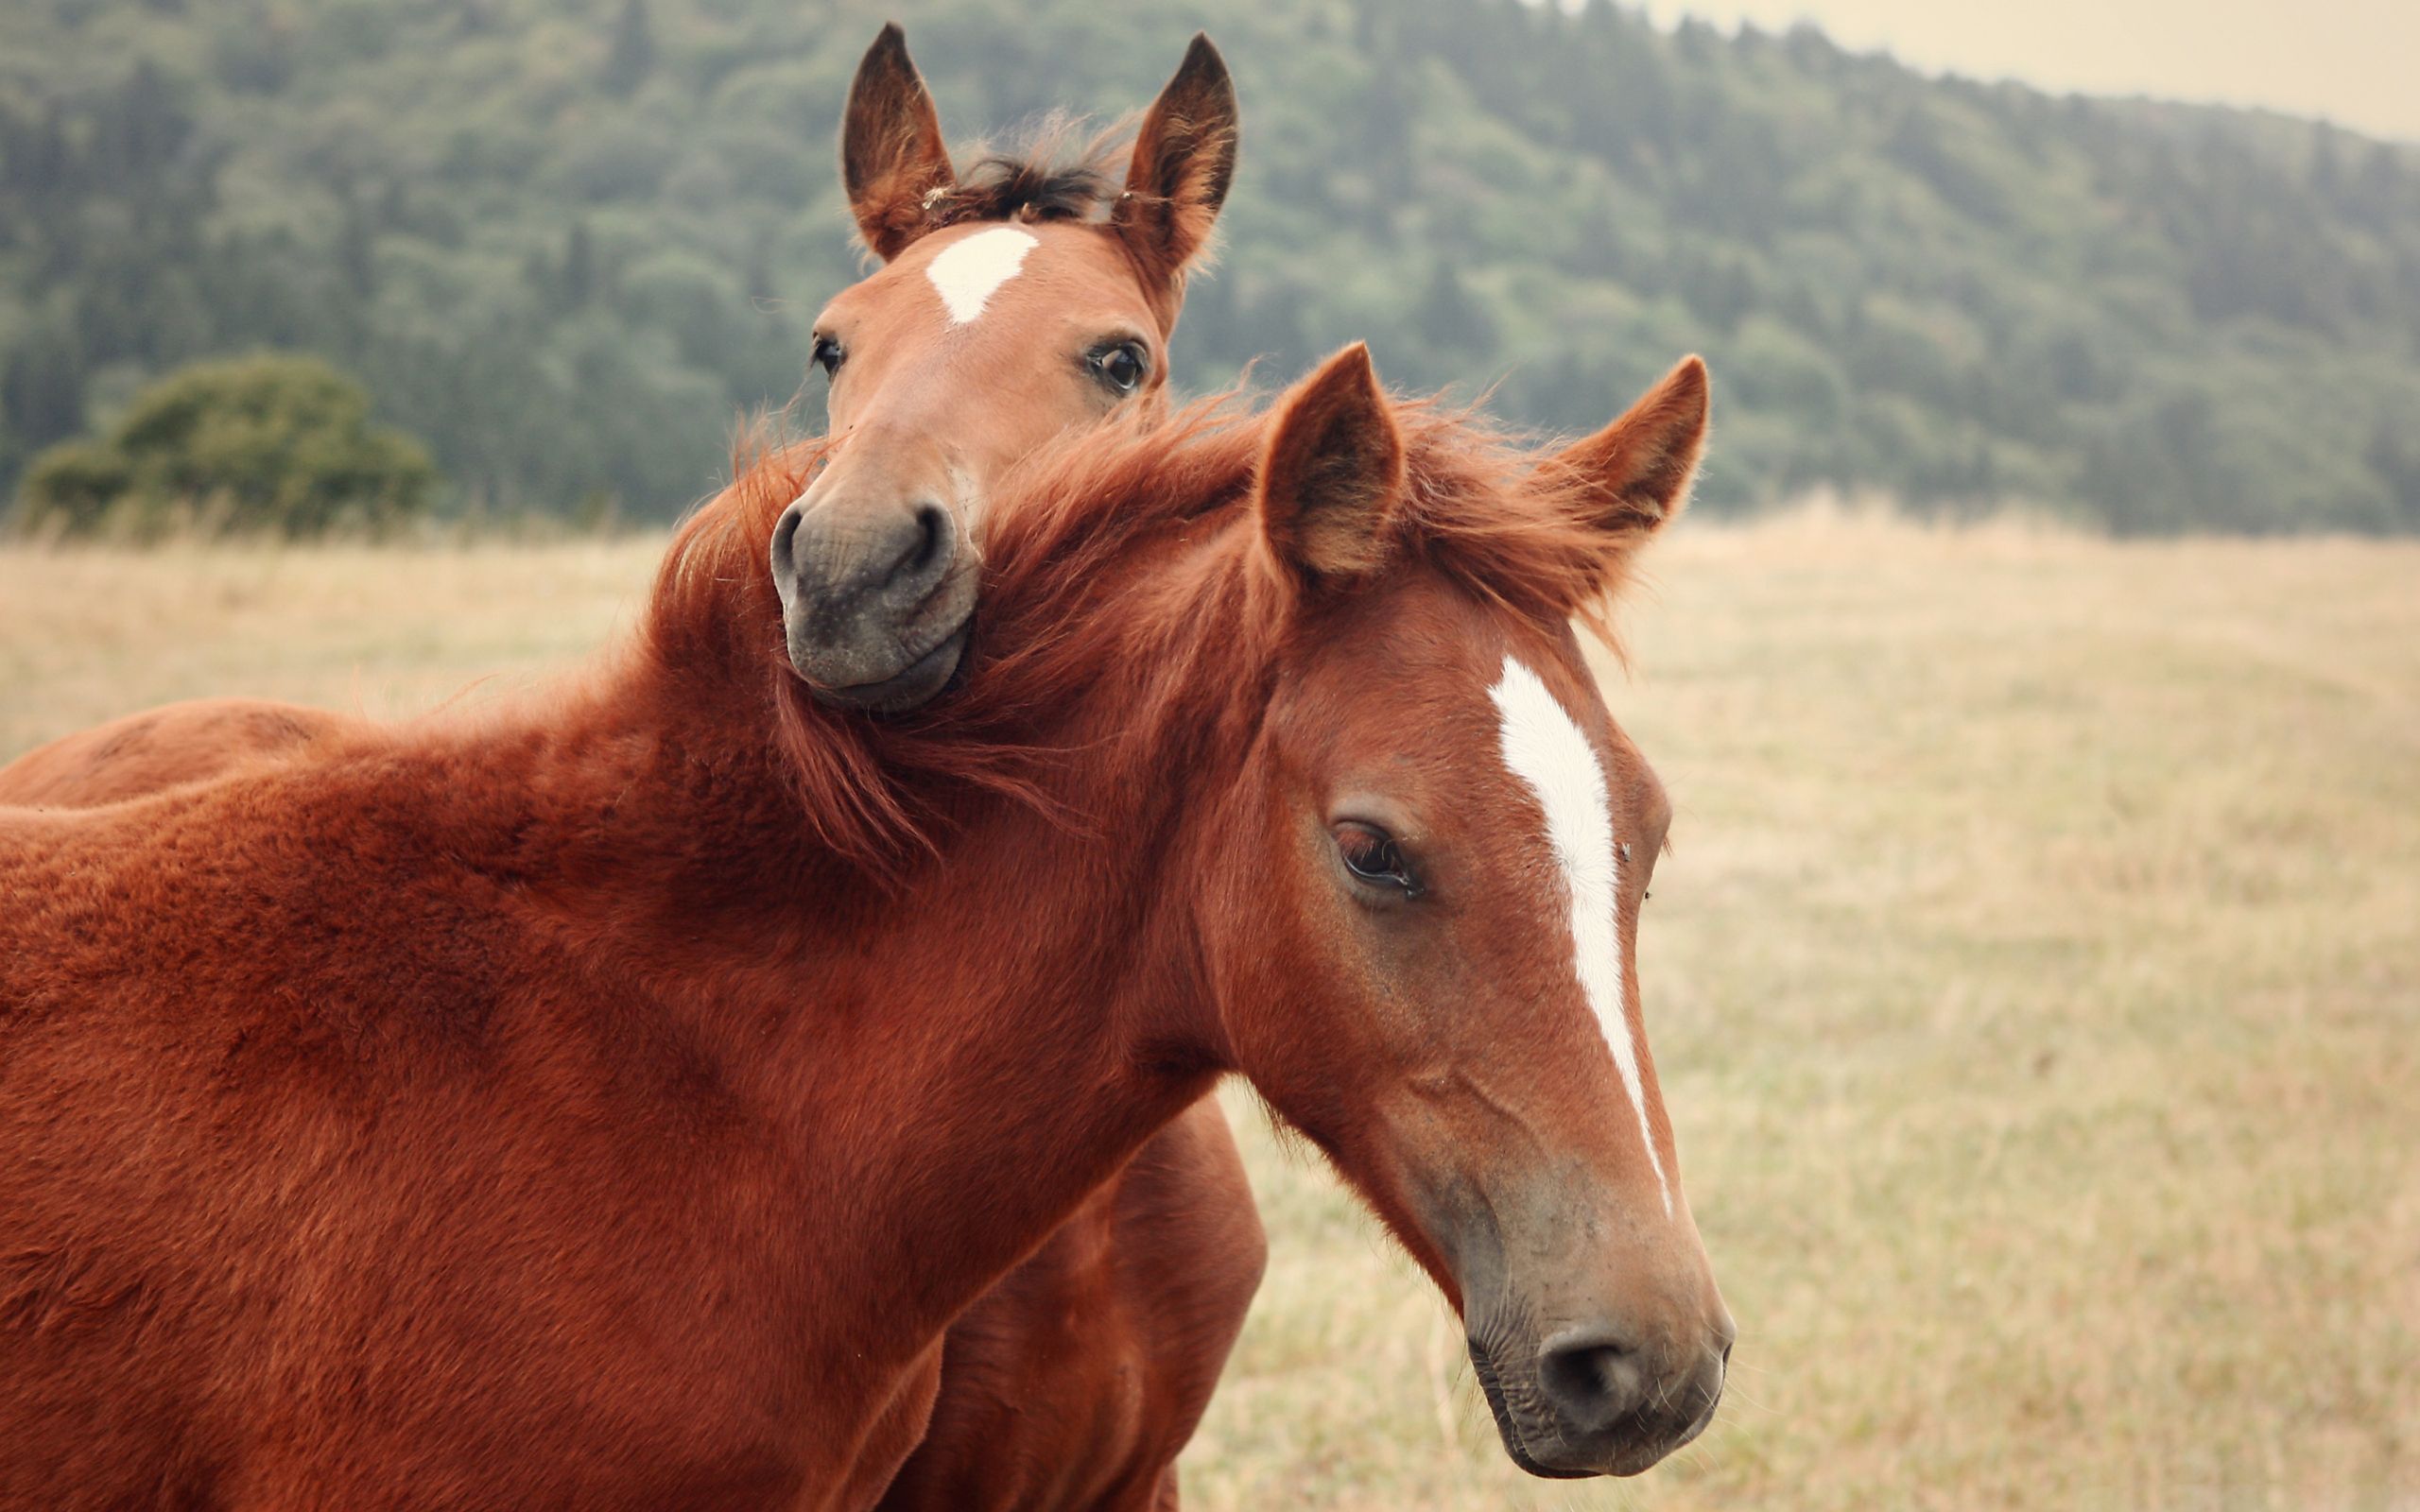 Cute Horses Wallpaper Background 24965 2560x1600px